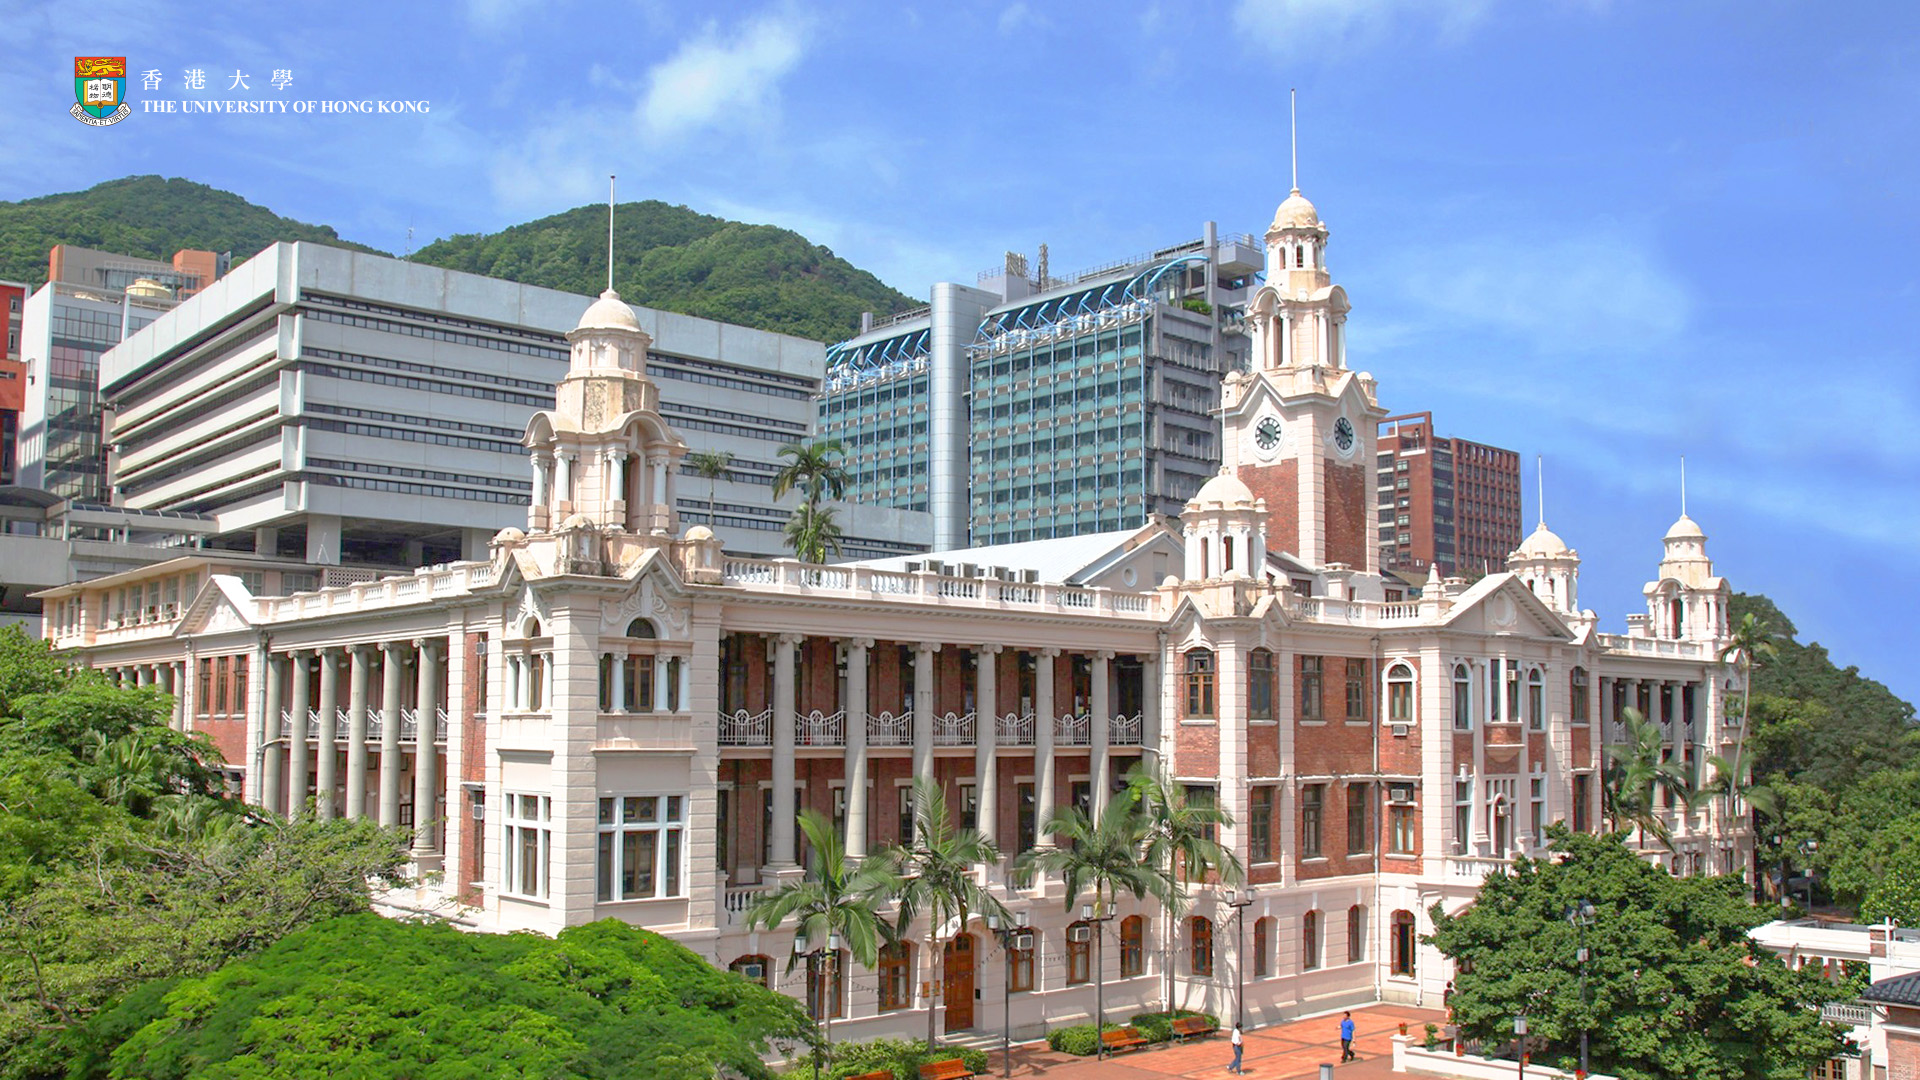 Picture of the main building on the campus of Hong Kong University